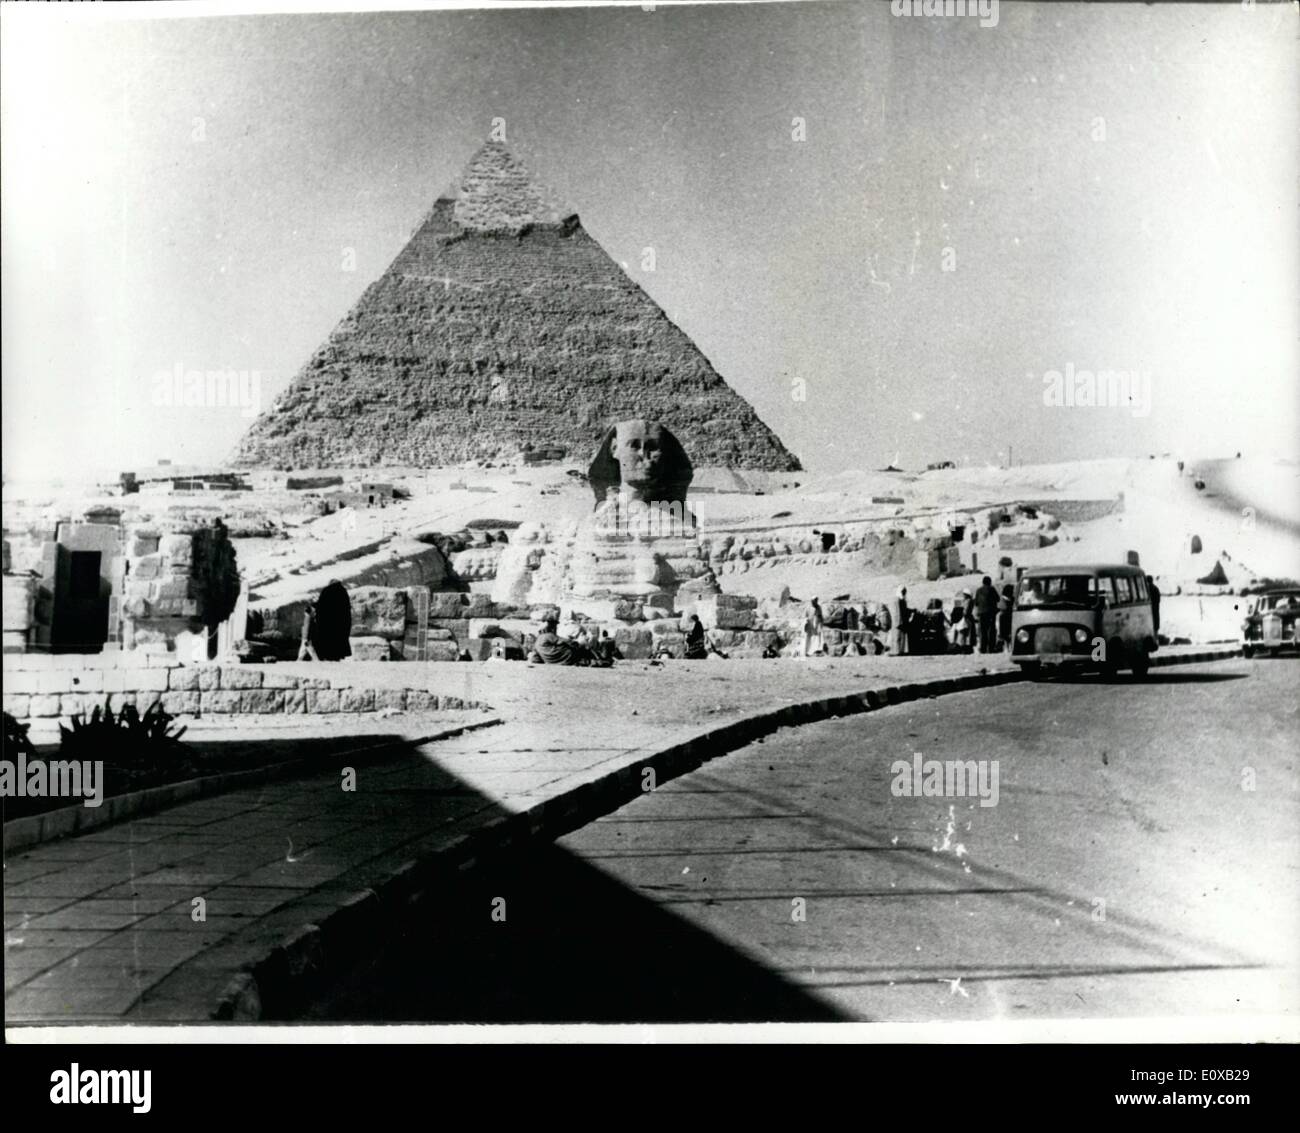 Jan. 01, 1966 - Chephren's pyramid opened to public after 5,000 years: Chephren's Pyramid, next in magnitude to Cheeps' was recently opened to the public in Egypt, after 5,000 years. When Chephren built his immortality fort in 2620 B.C. he didn't foresee that one day his grave would one day be lit by lamps that disclose all the mysteries of his place. Unlike Cheops', Chephren's Pyramid has two entrances in addition to the opening dug through by tomb-thieves who robbed it of all its treasures Stock Photo